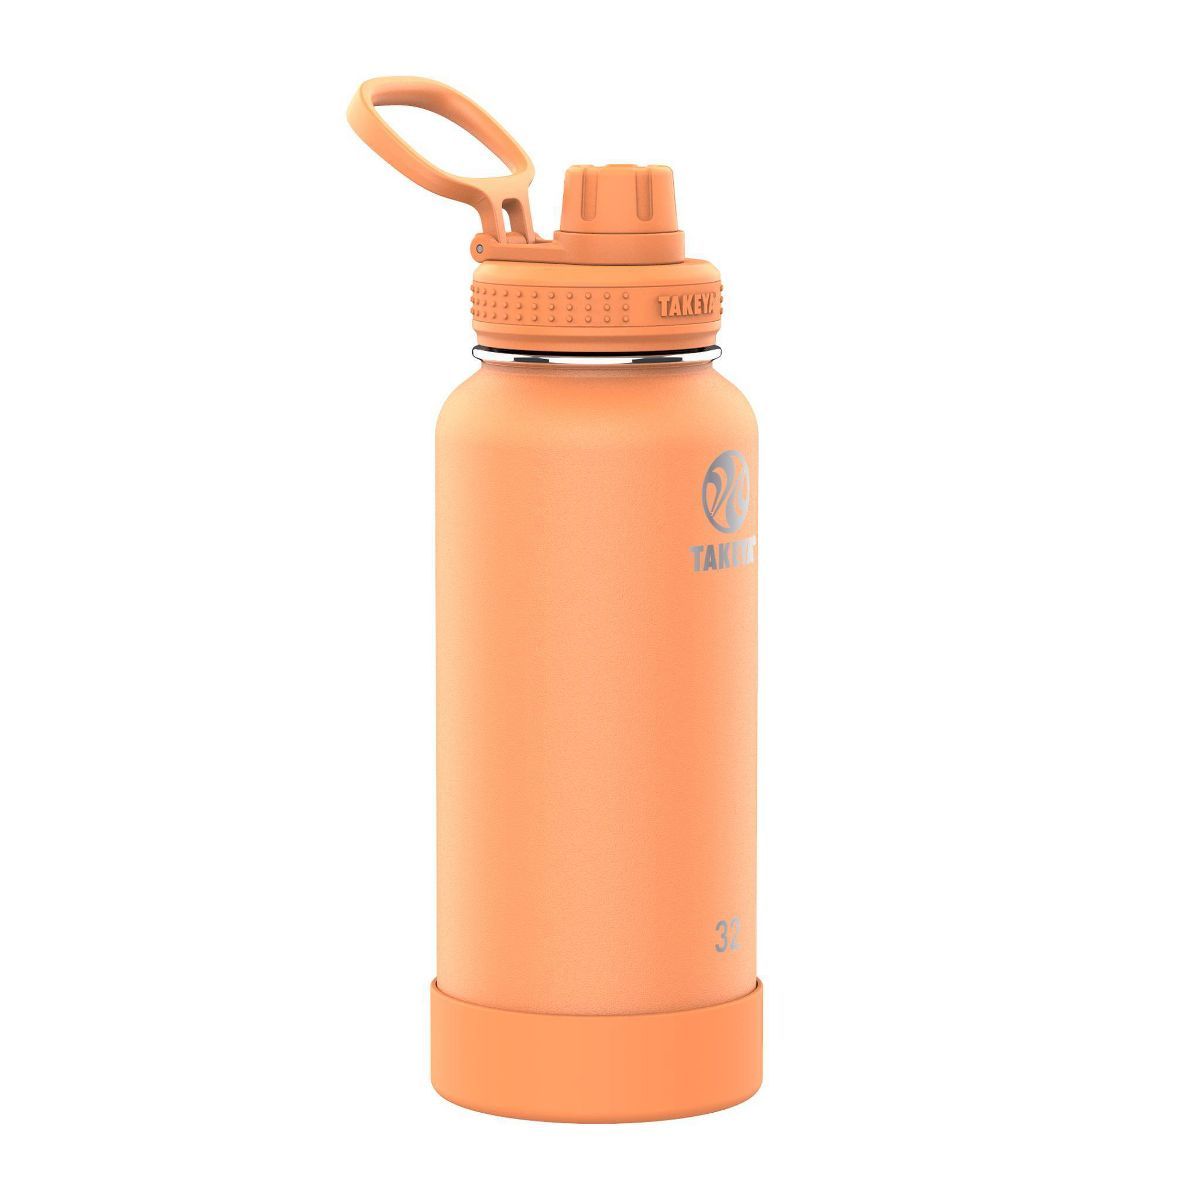 Takeya 32oz Actives Insulated Stainless Steel Water Bottle with Spout Lid | Target